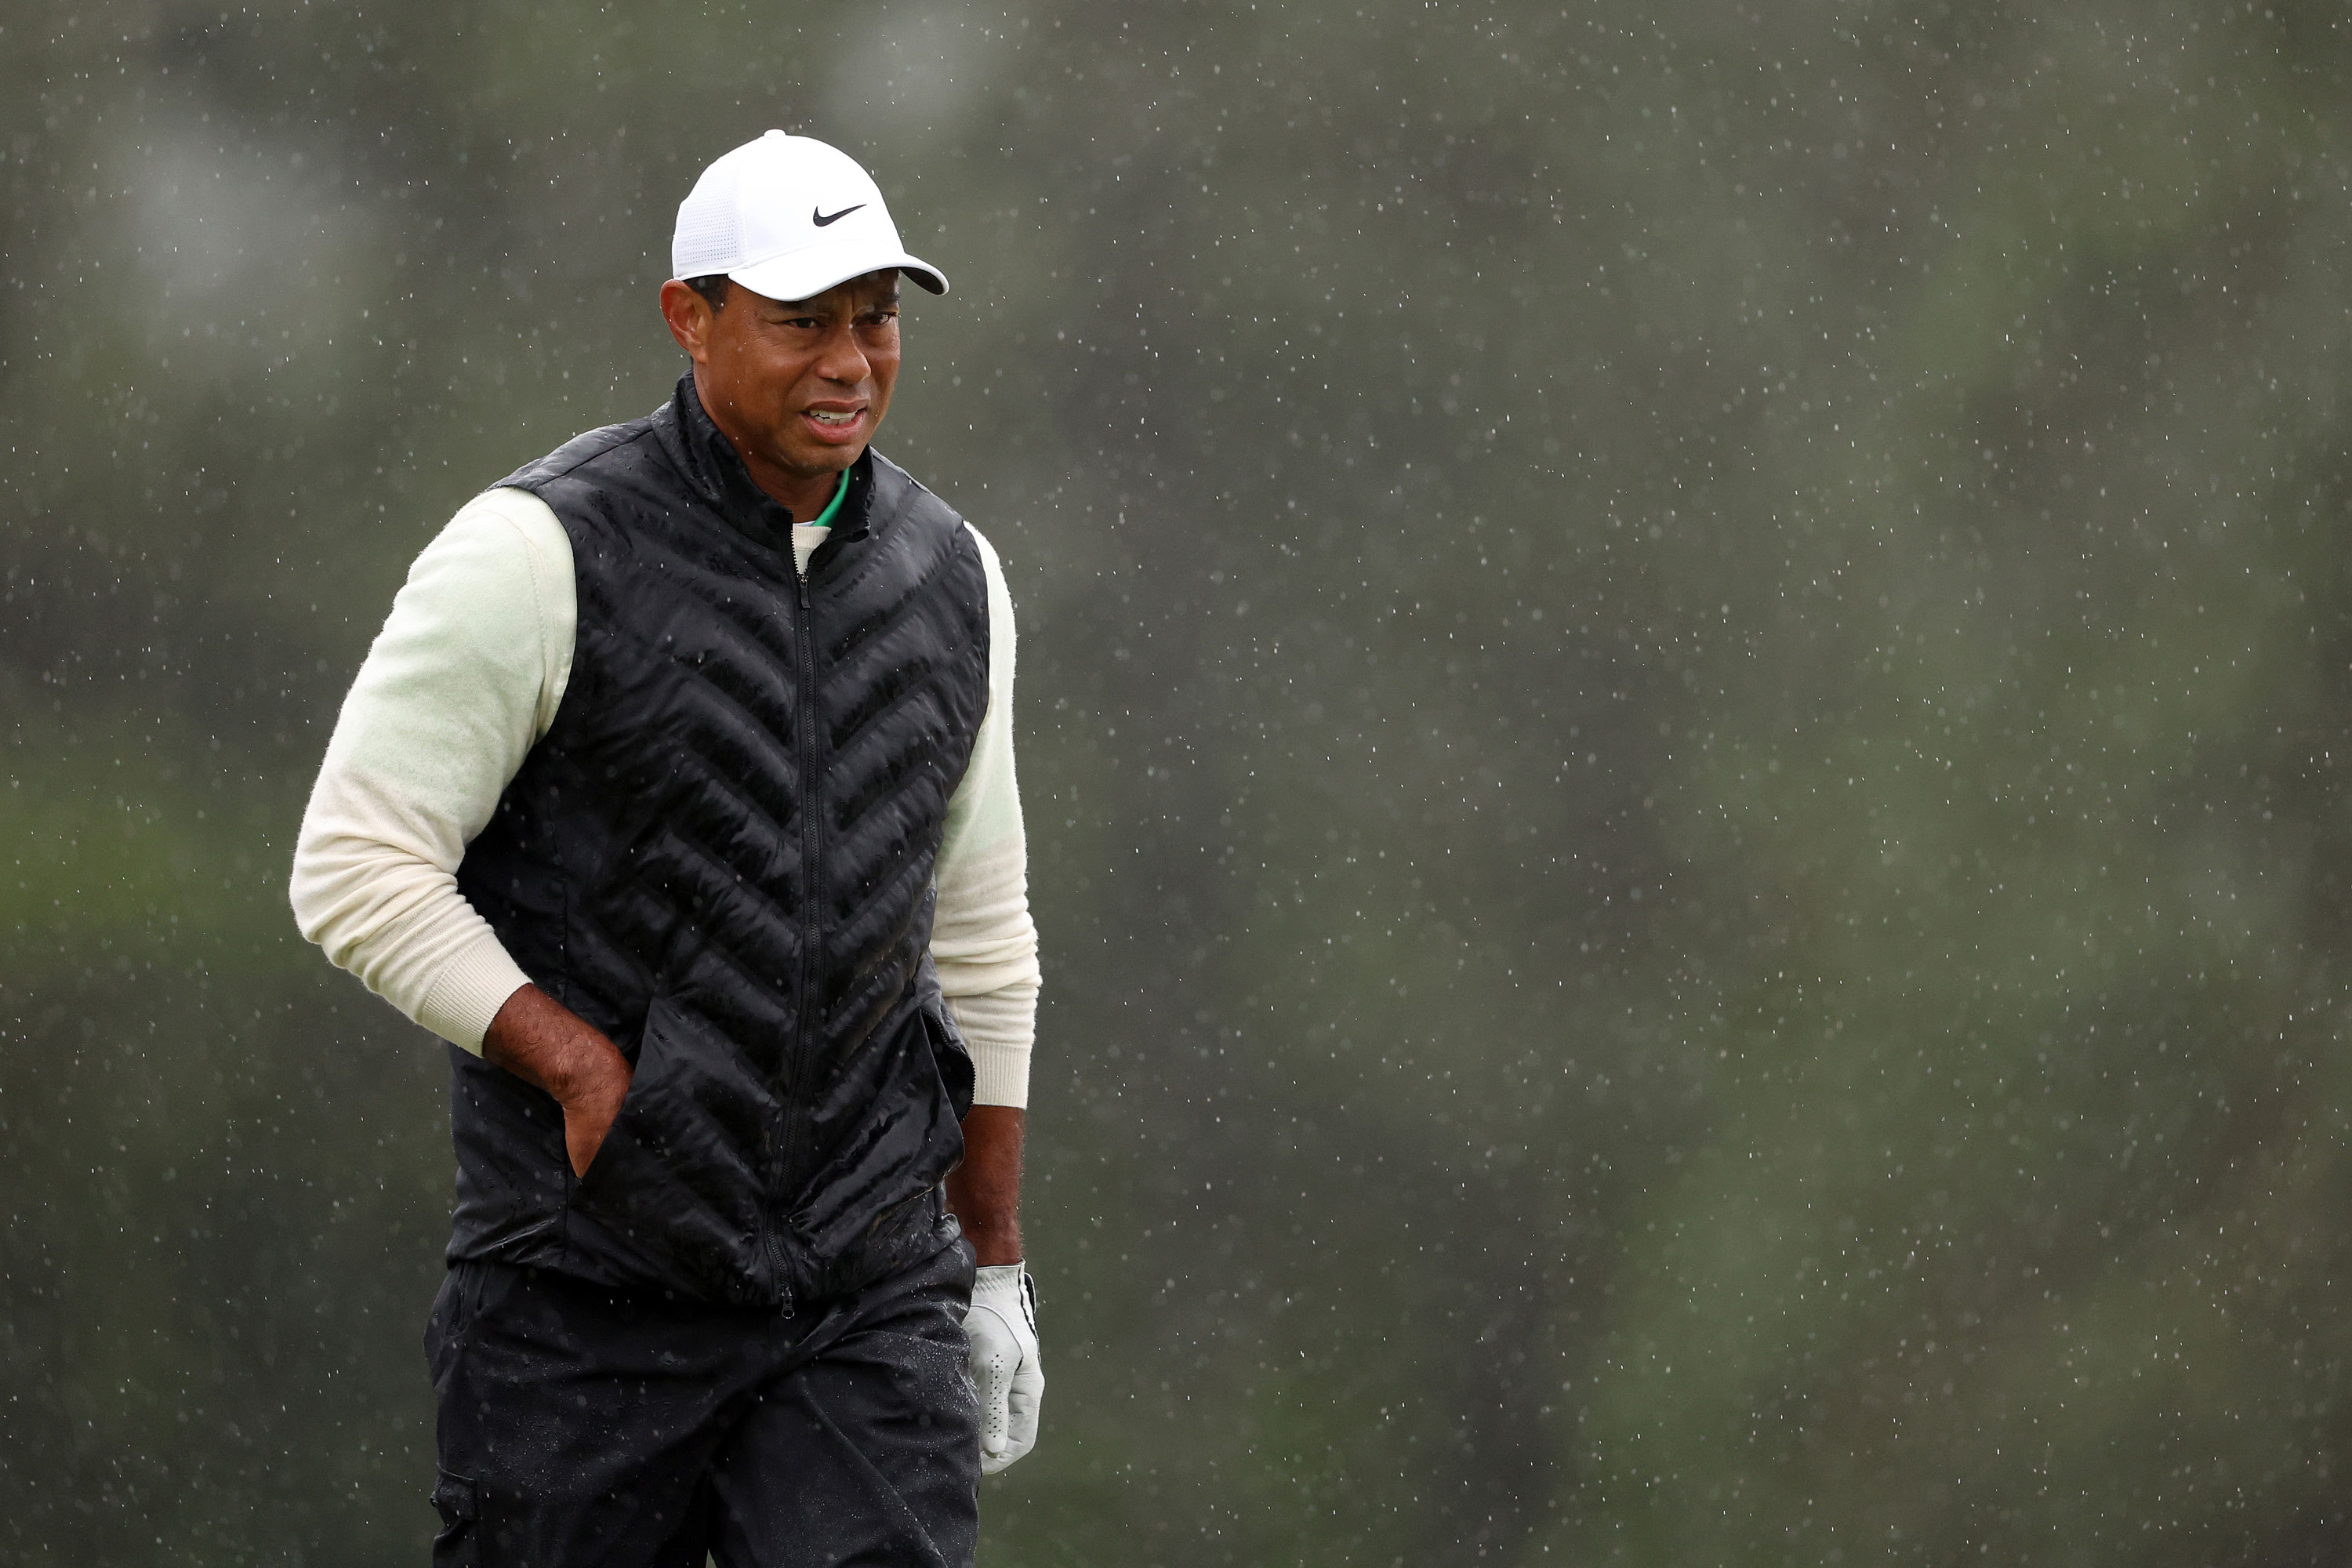 2023 Masters live stream, watch online: Saturday TV schedule, channel,  Tiger Woods coverage, how to follow 